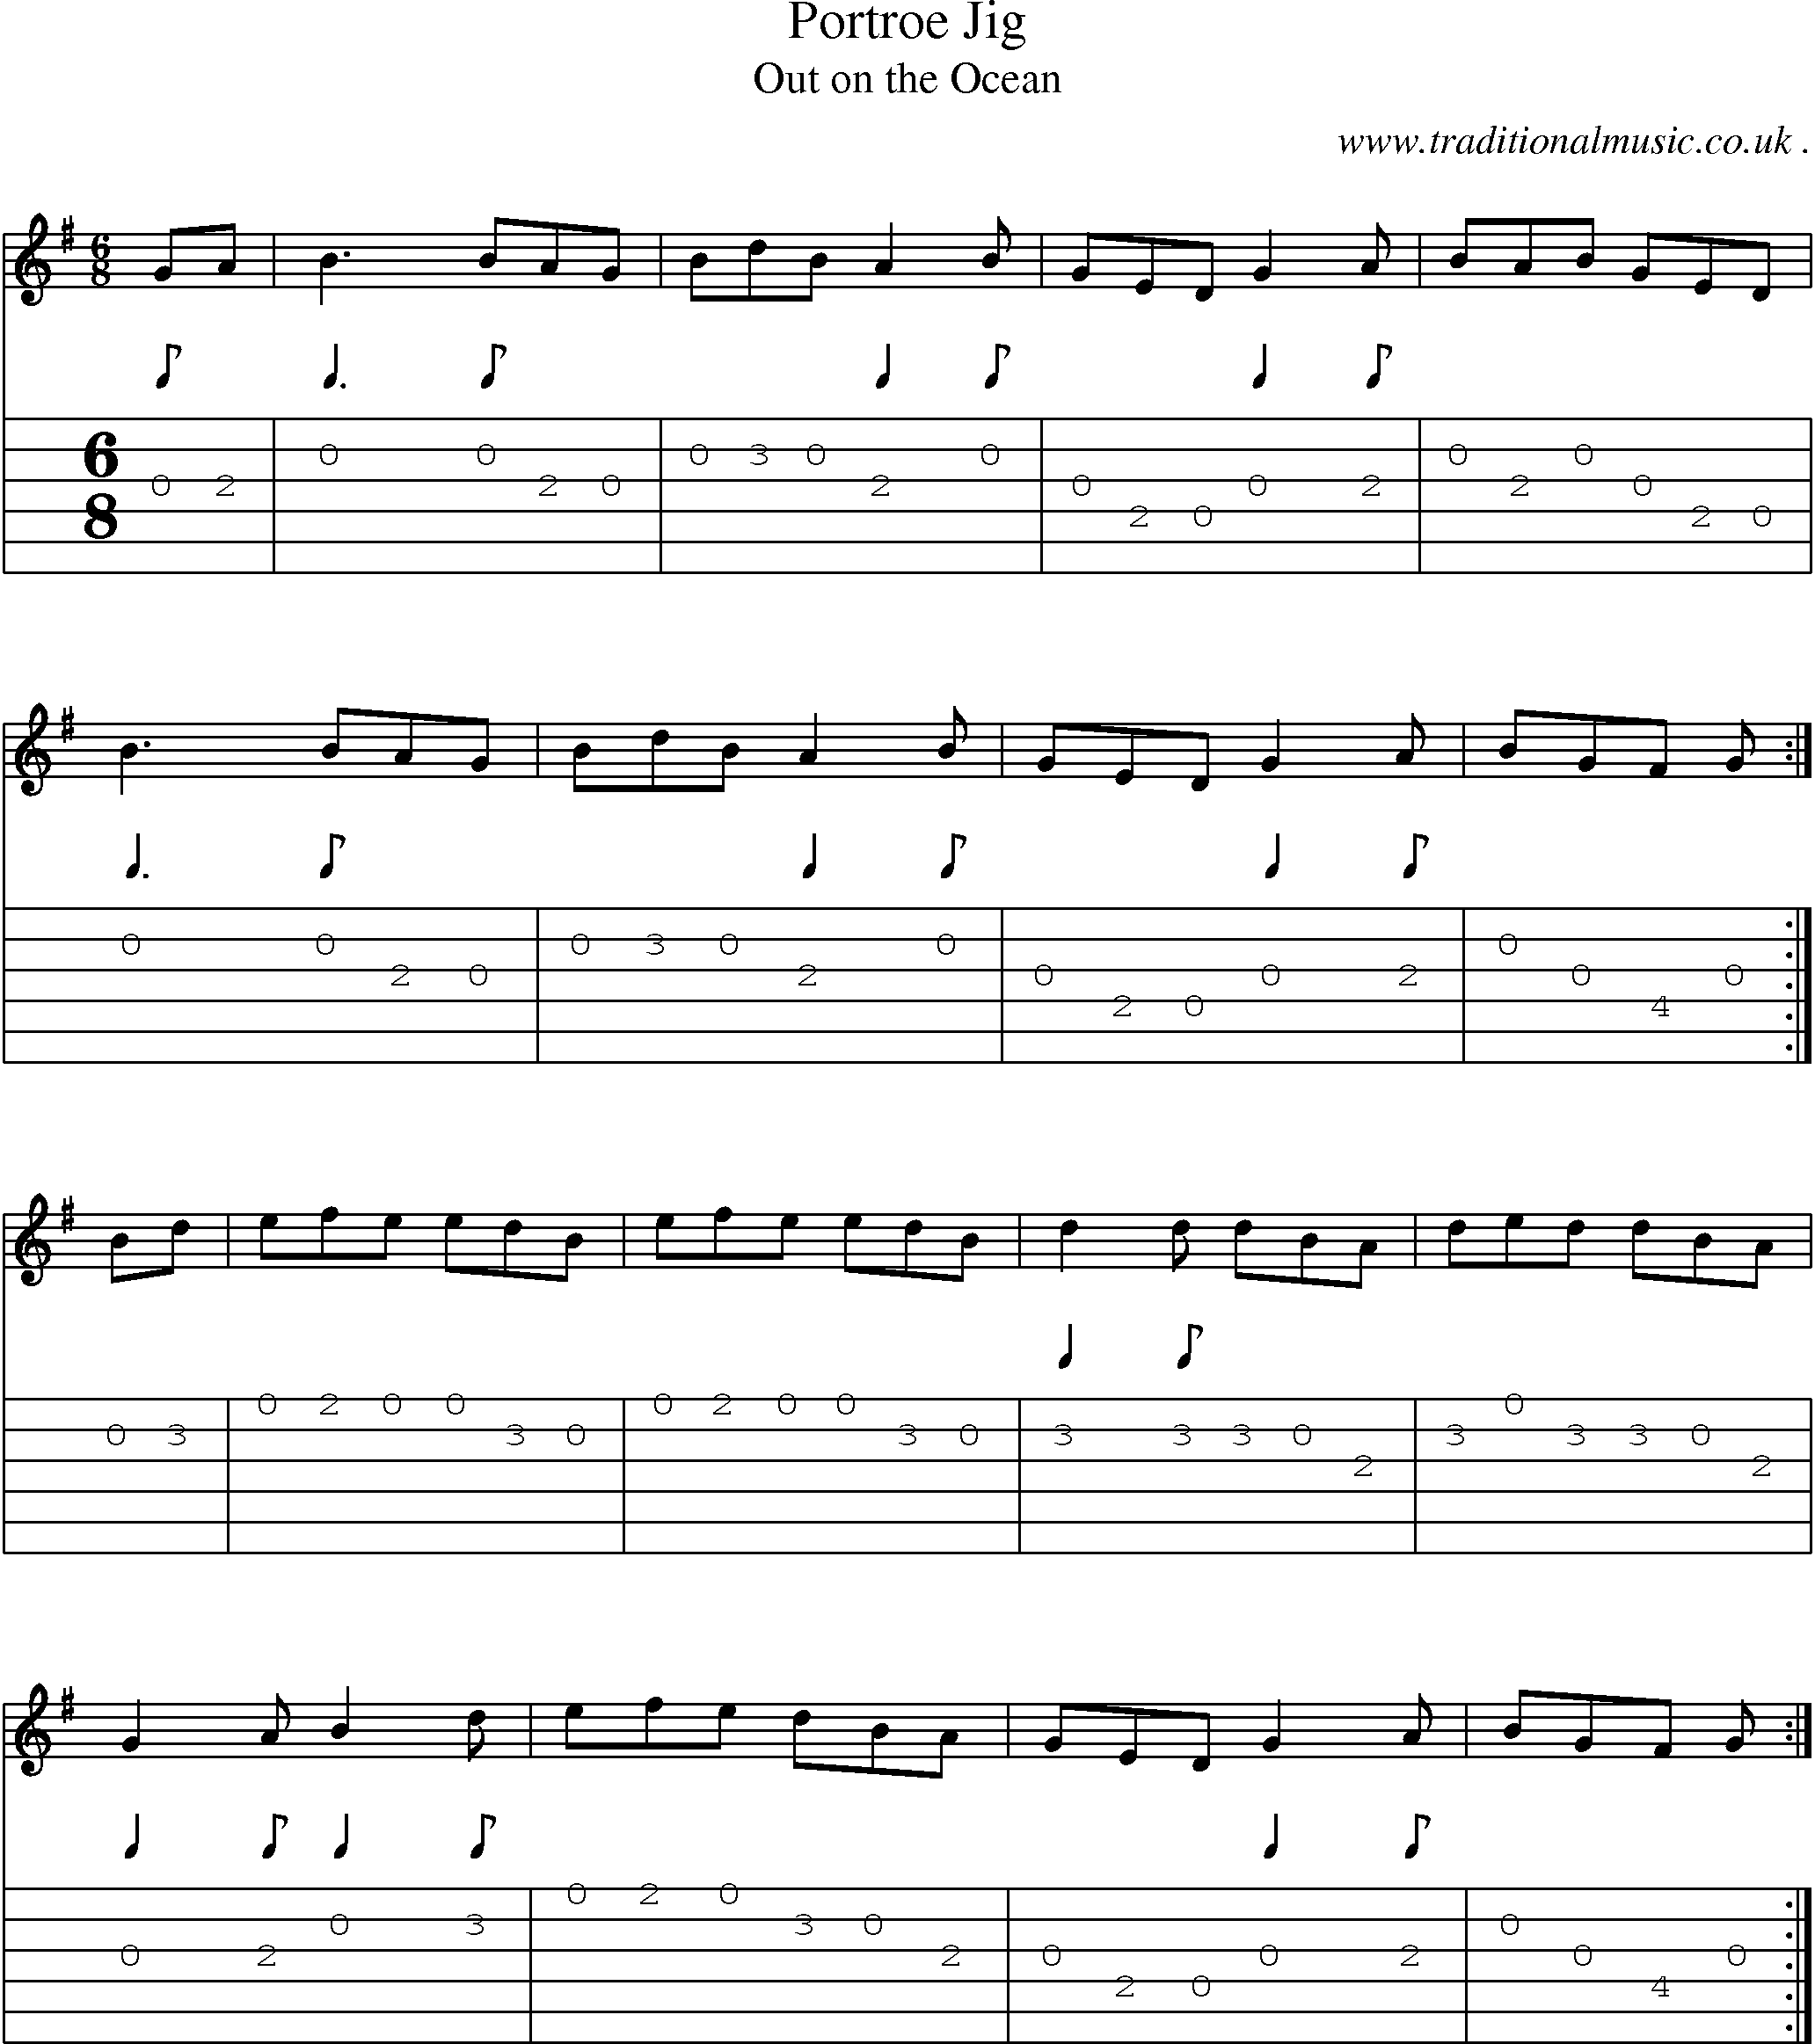 Sheet-Music and Guitar Tabs for Portroe Jig